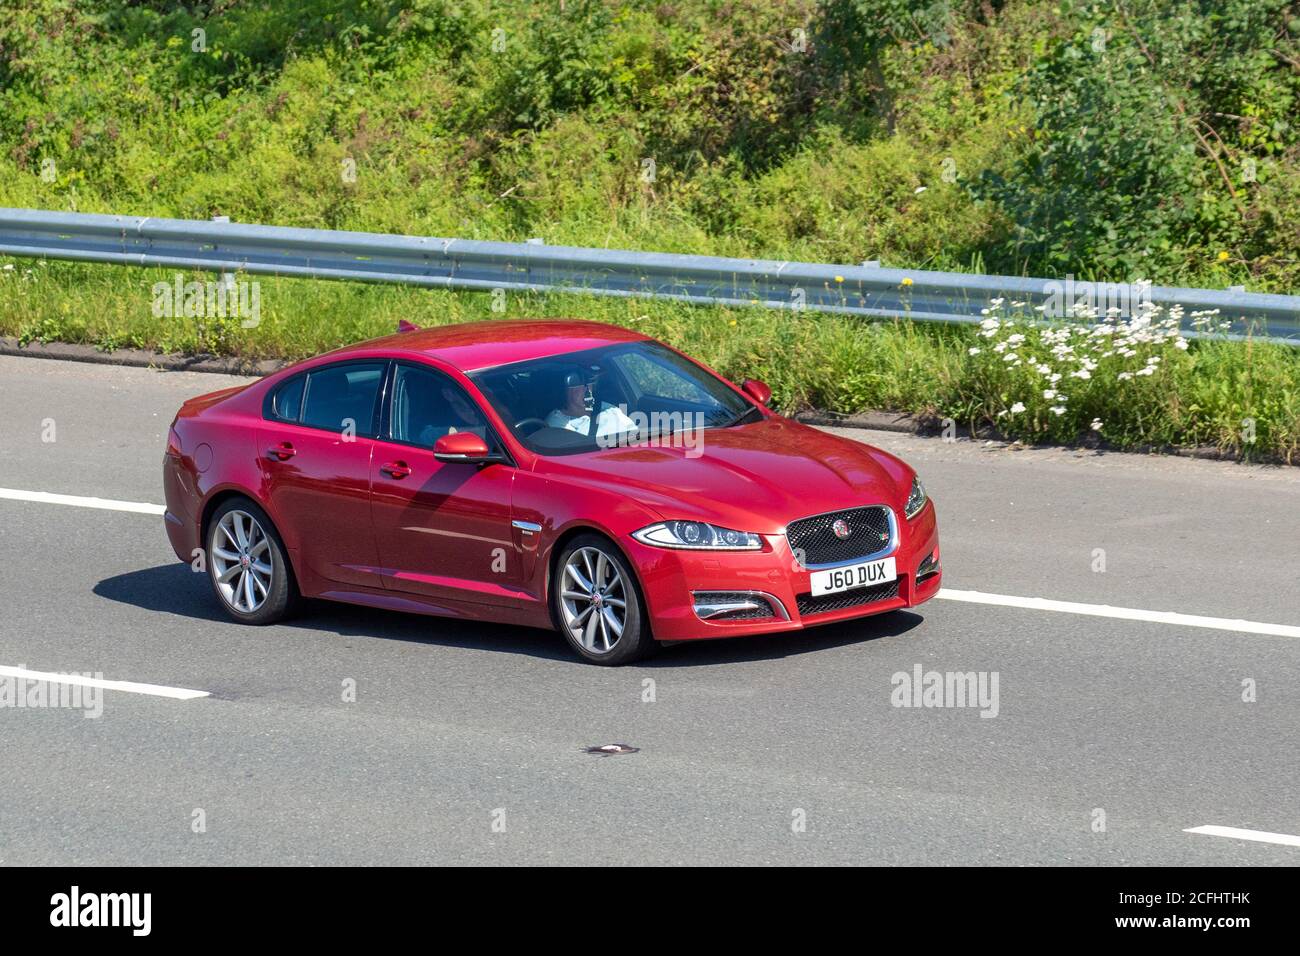 2013 red Jaguar XF R-Sport D Auto; Vehicular traffic moving vehicles, cars driving vehicle on UK roads, motors, motoring on the M6 motorway highway network. Stock Photo